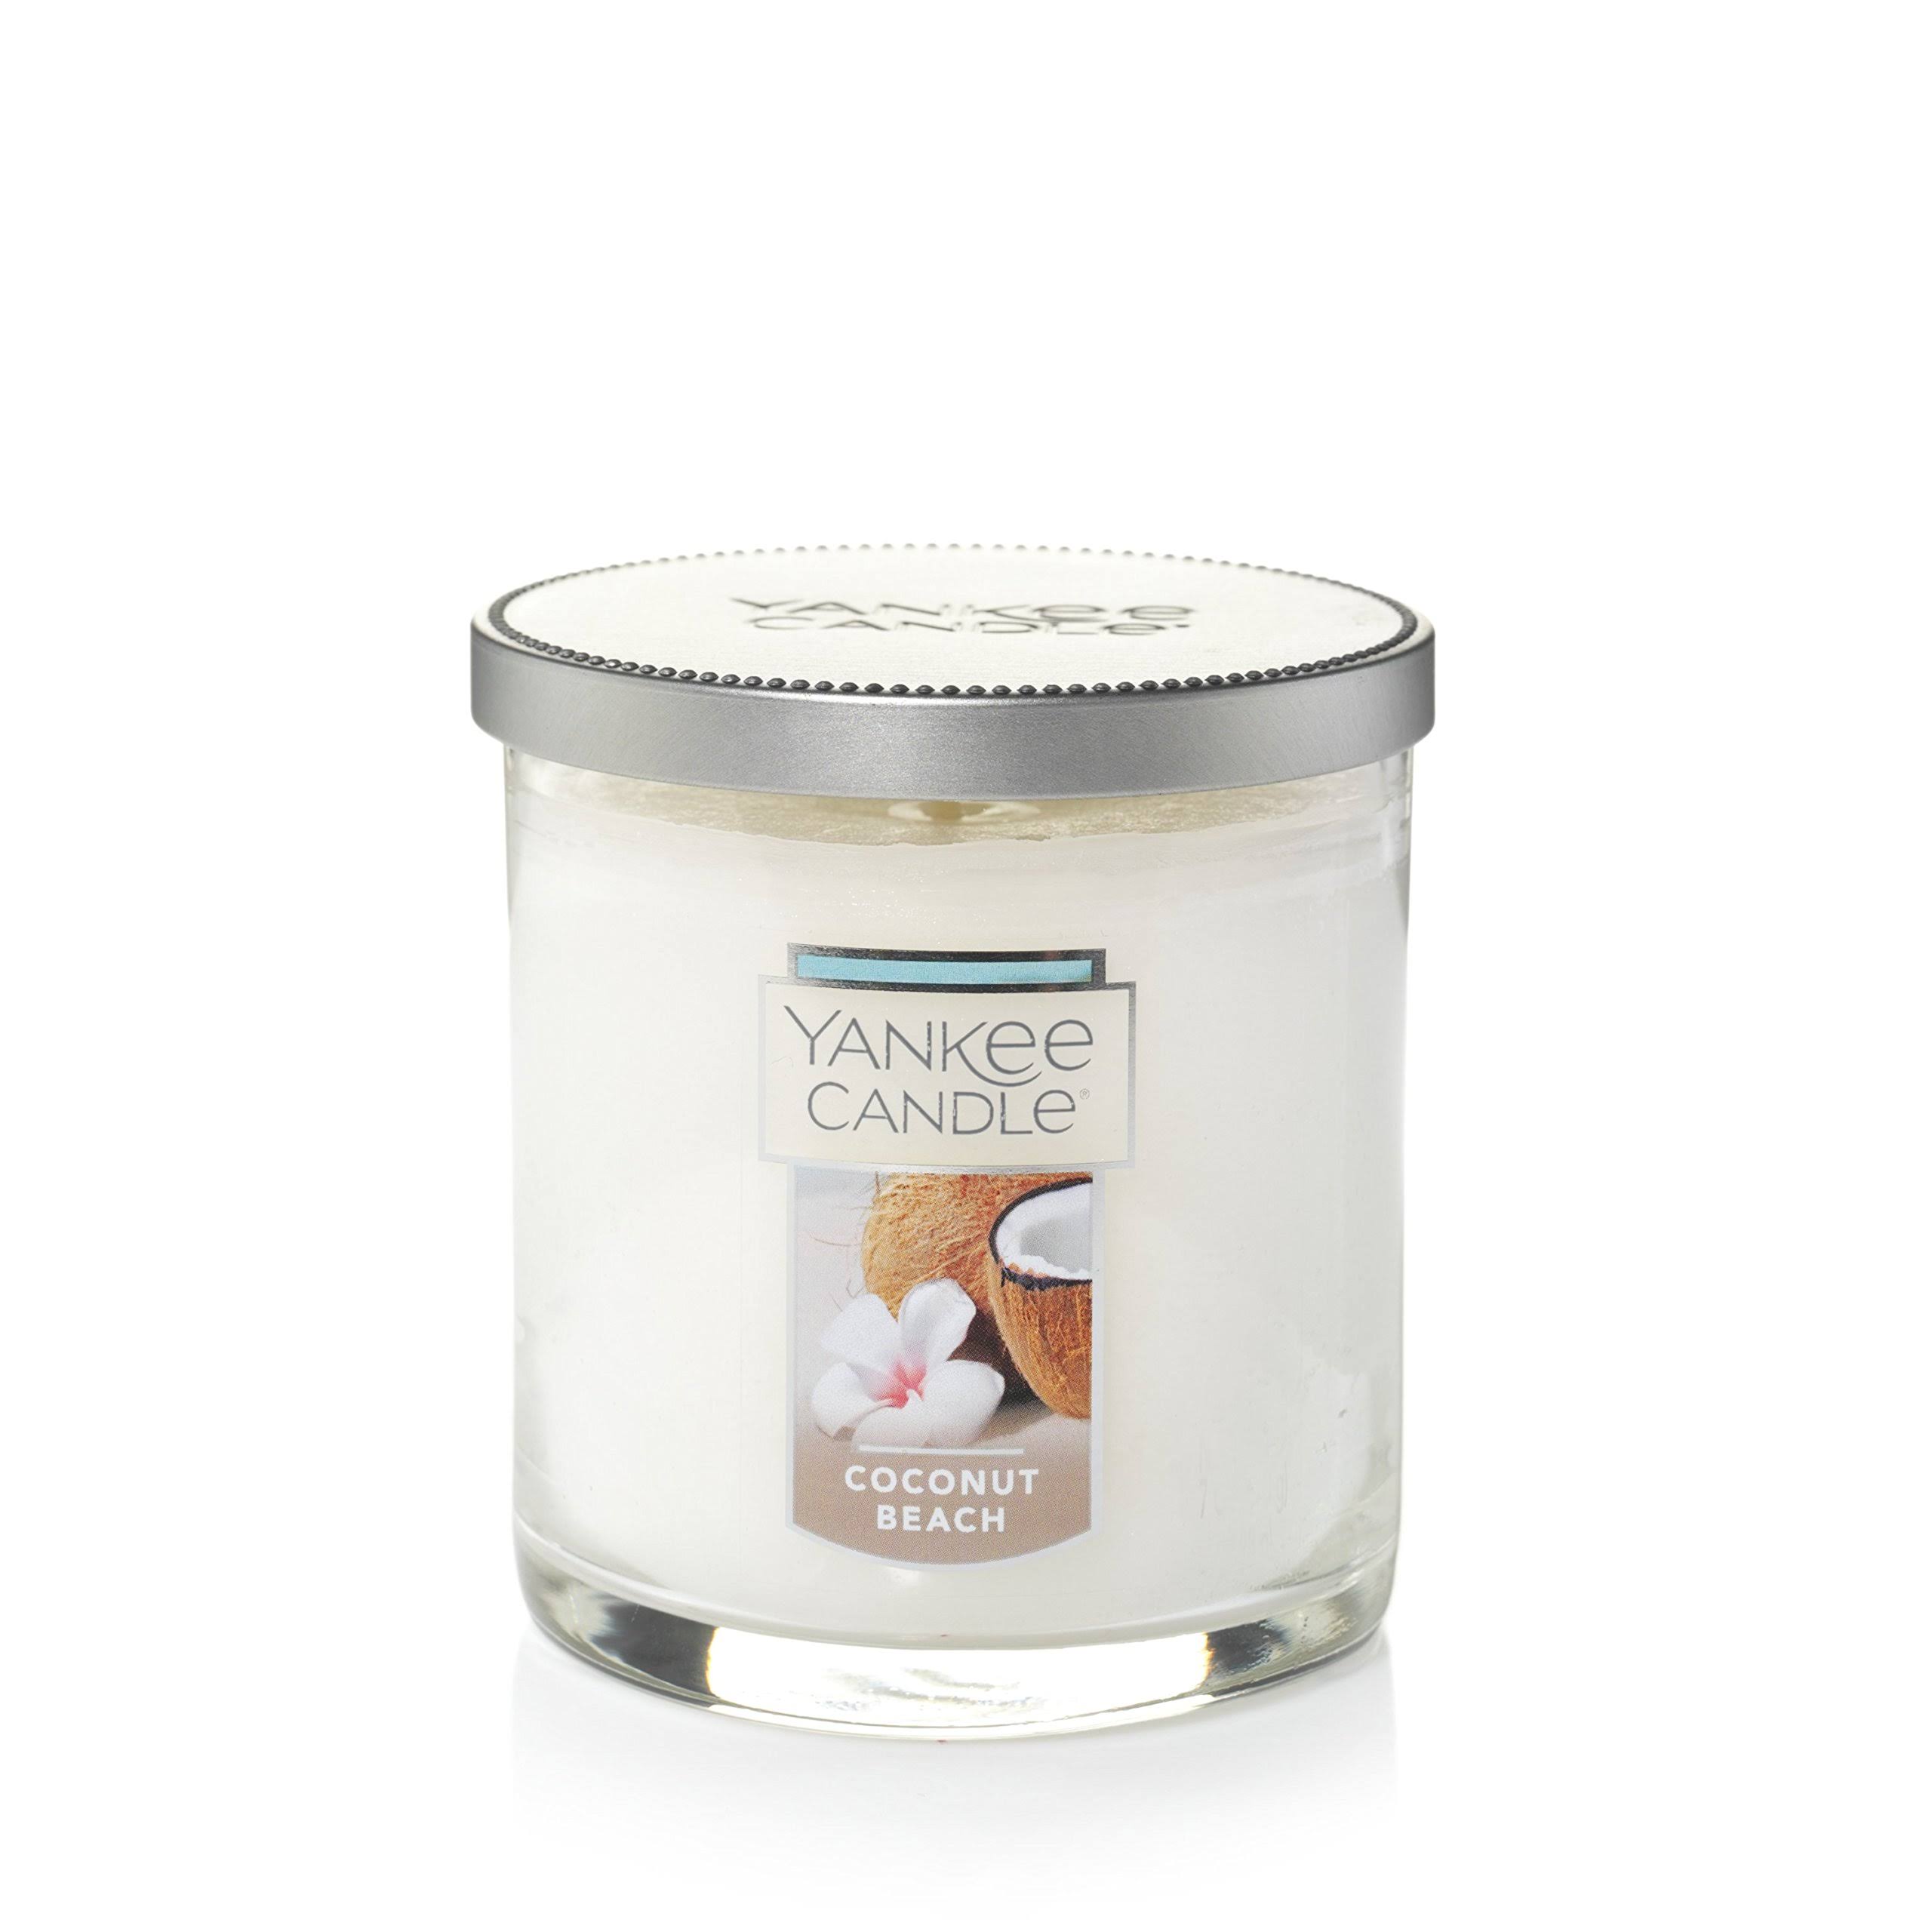 Yankee Candle Coconut Beach, 1523485Z, White, Large 2-Wick Tumbler